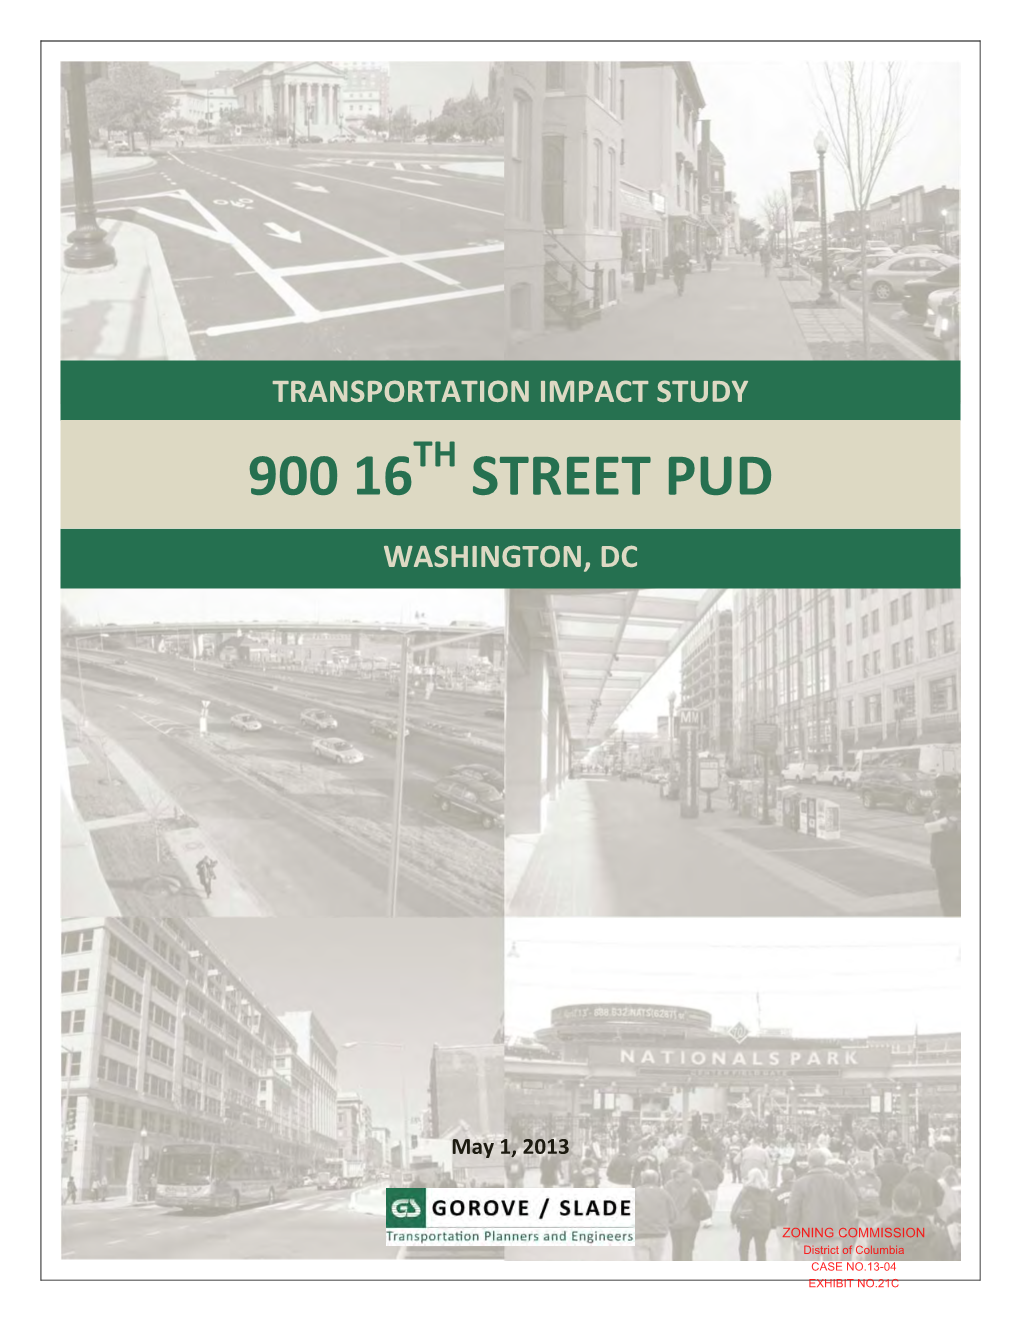 900 16 Street Project Is Located at the Level of Service to a Component of the Th Intersection of I (Eye) and 16 Streets in Surrounding Transportation Network